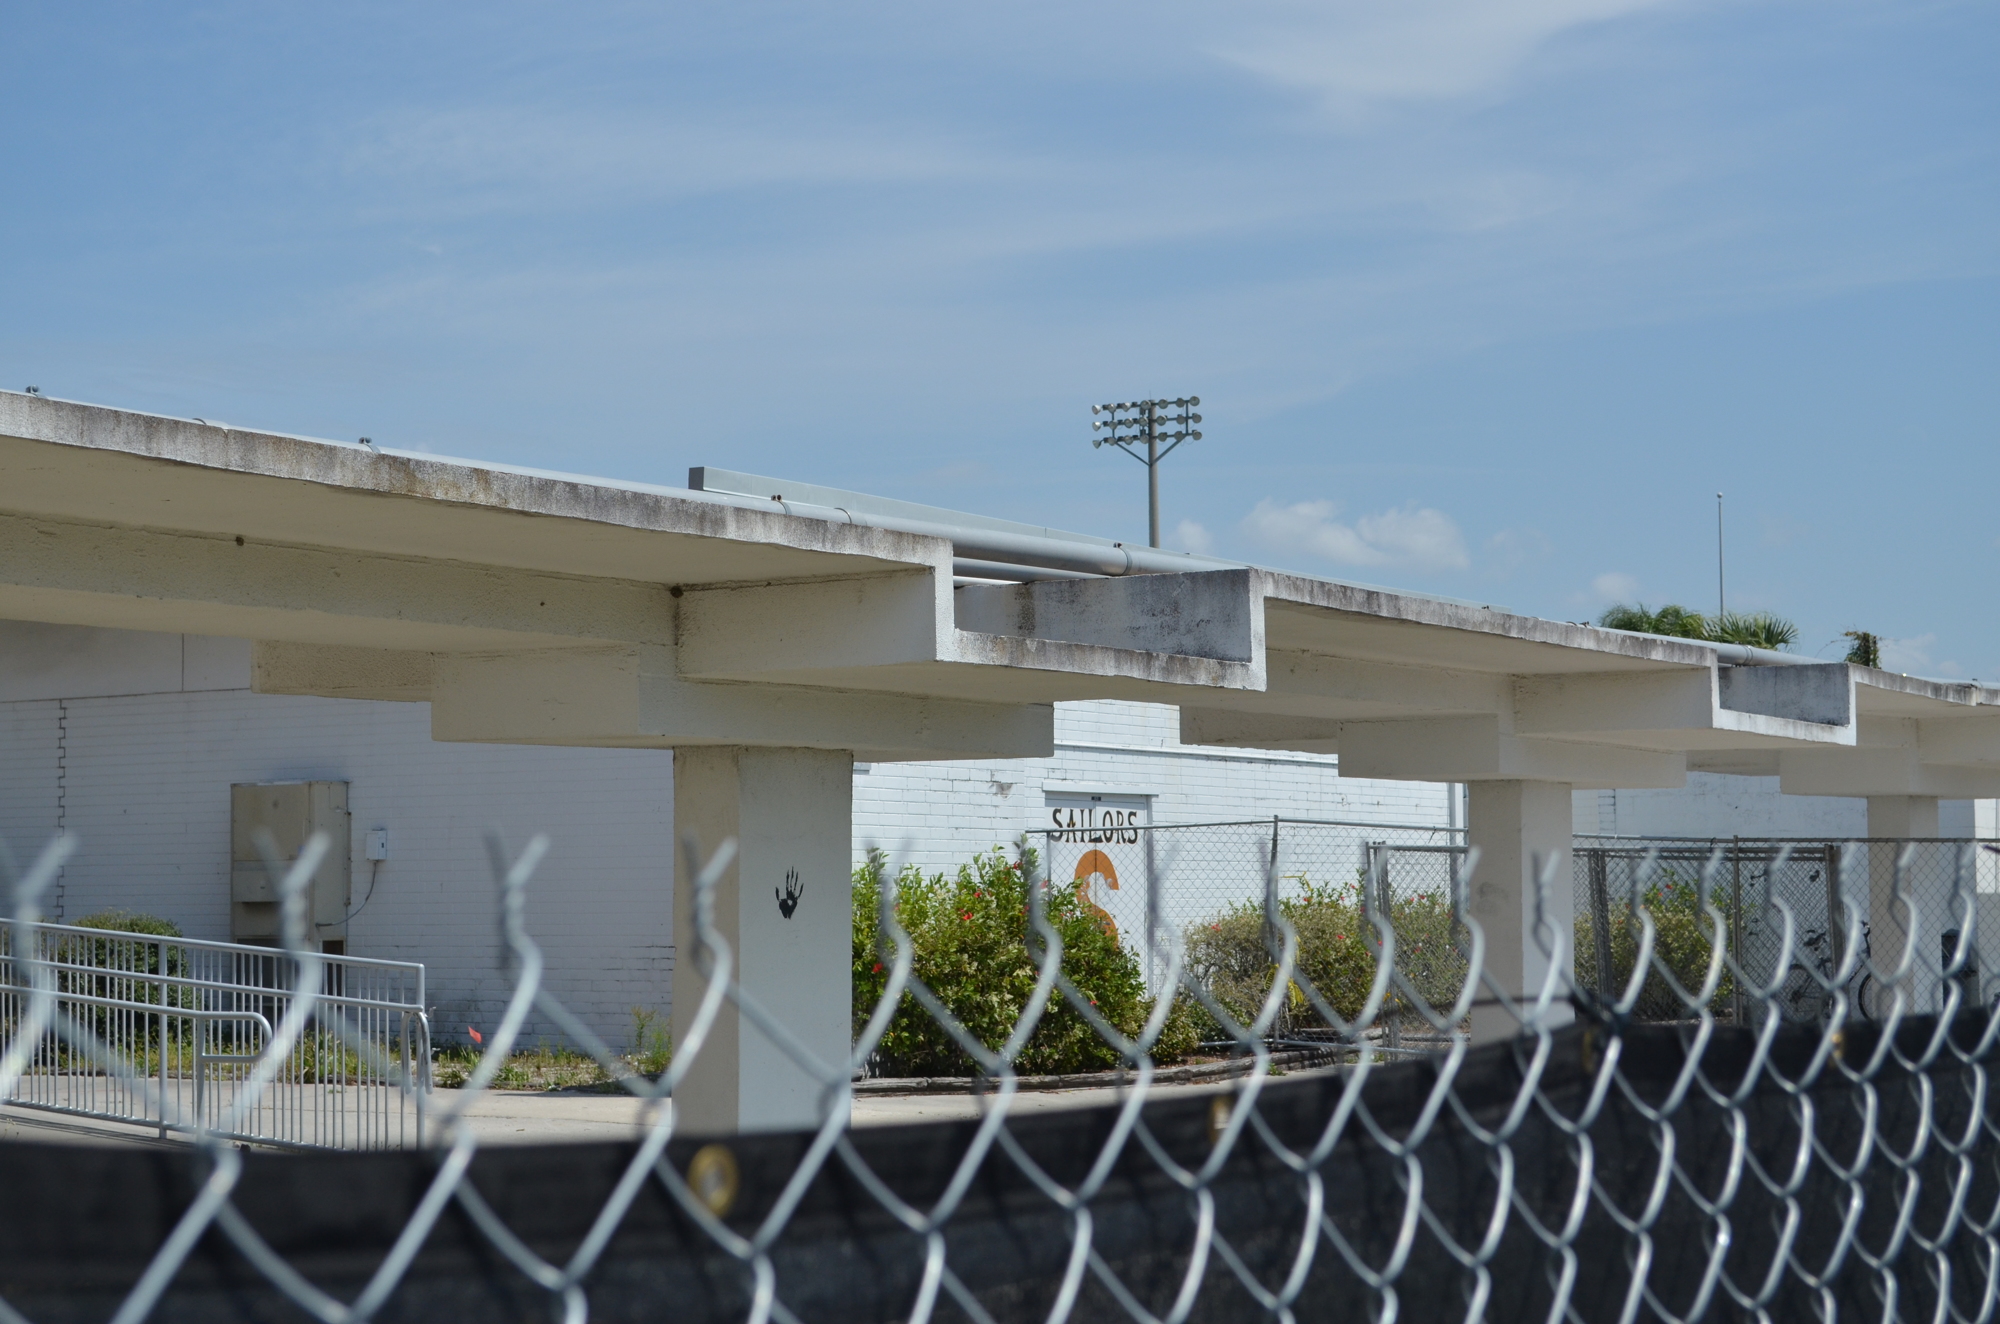 Designed by renowned American architect Paul Rudolph, the canopy connects the architectural vision of the current Sarasota High School with the old building.